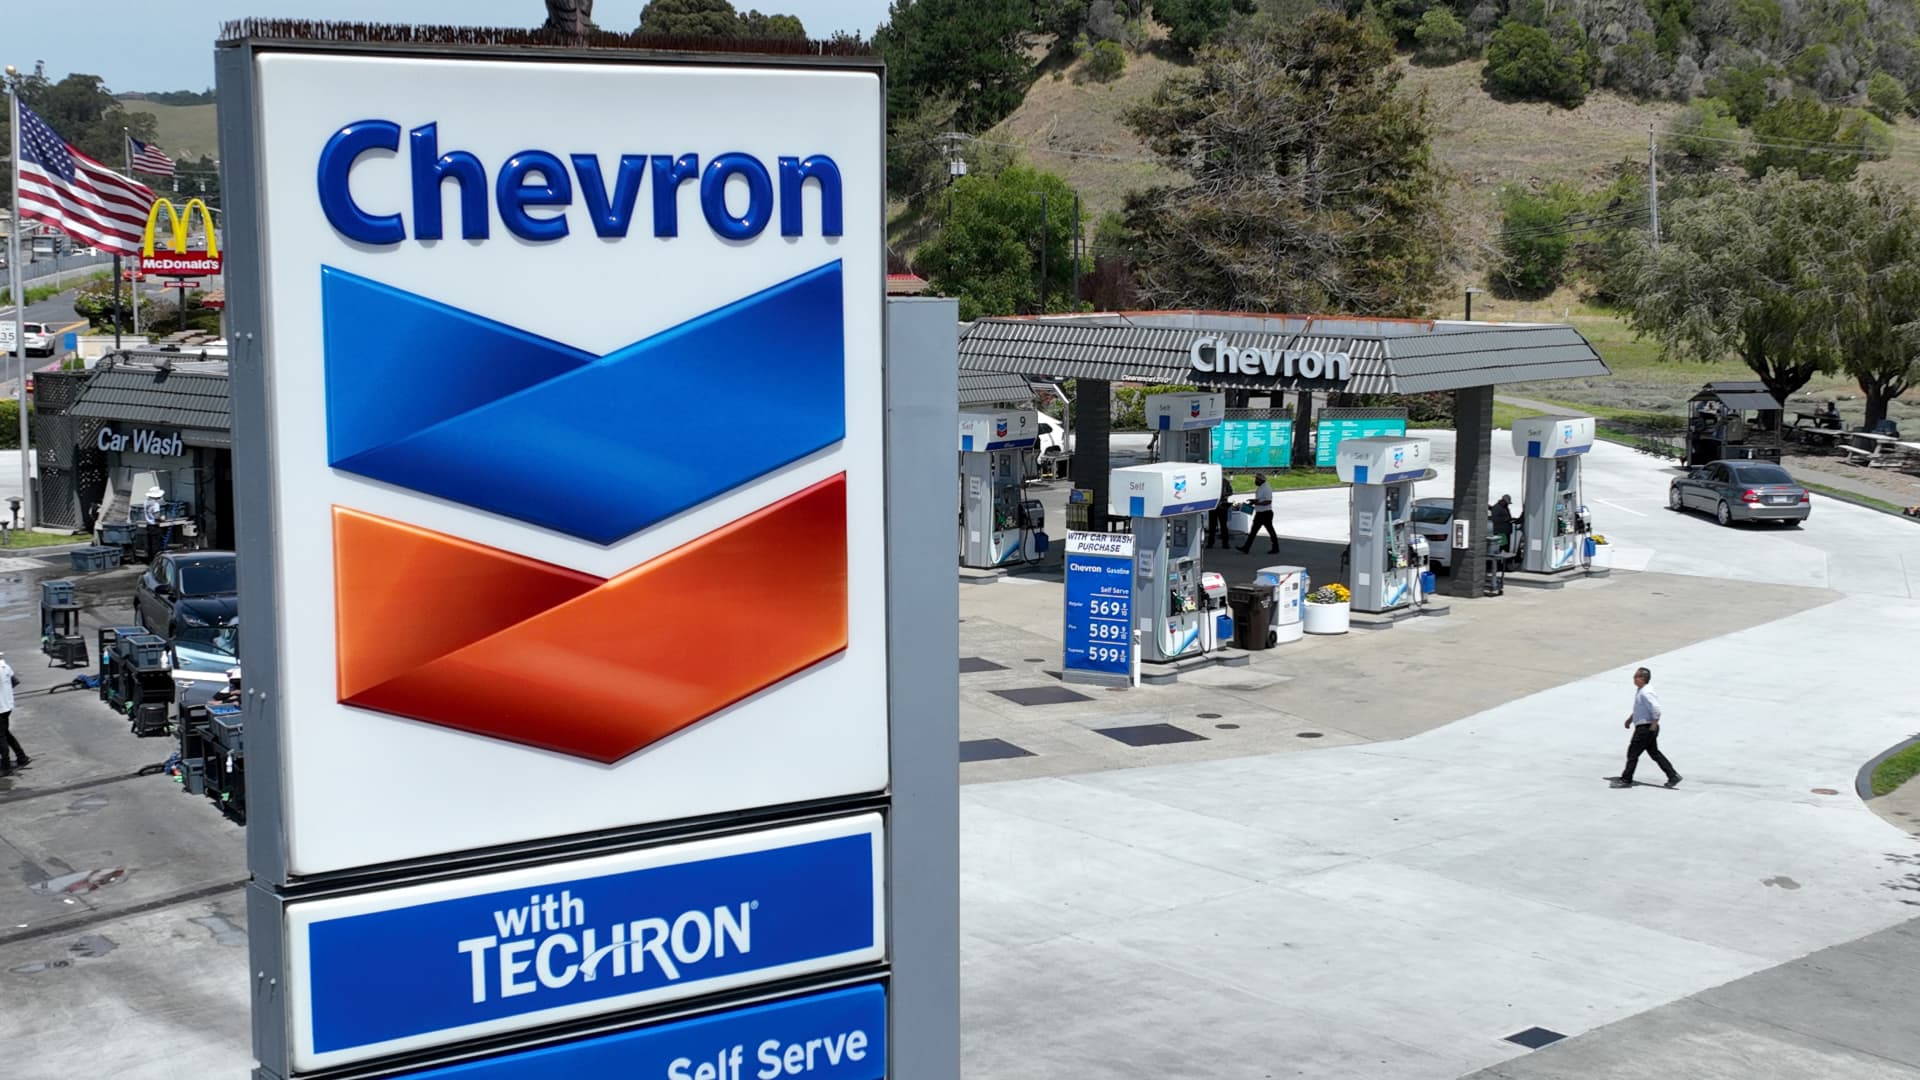 The profit of U.S. oil giant Chevron more than quadrupled during the first quarter of 2022.